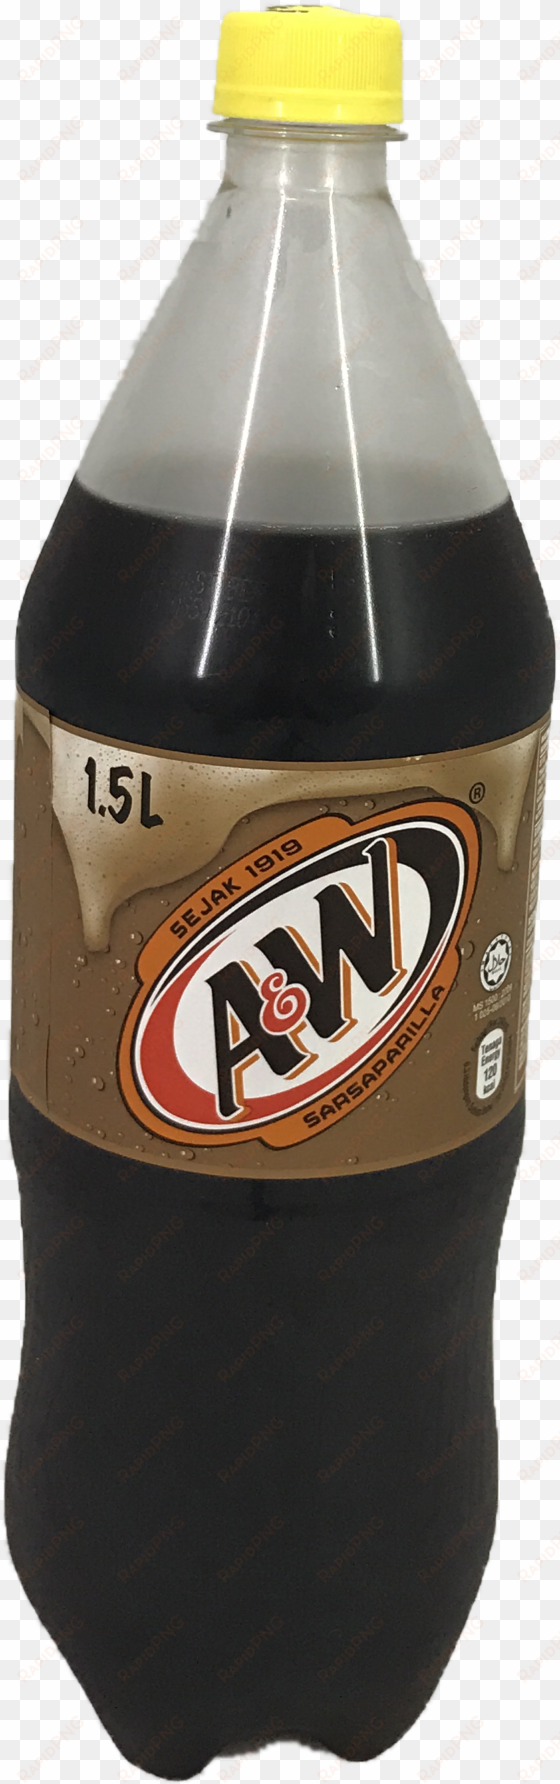 a&w root beer - a&w root beer